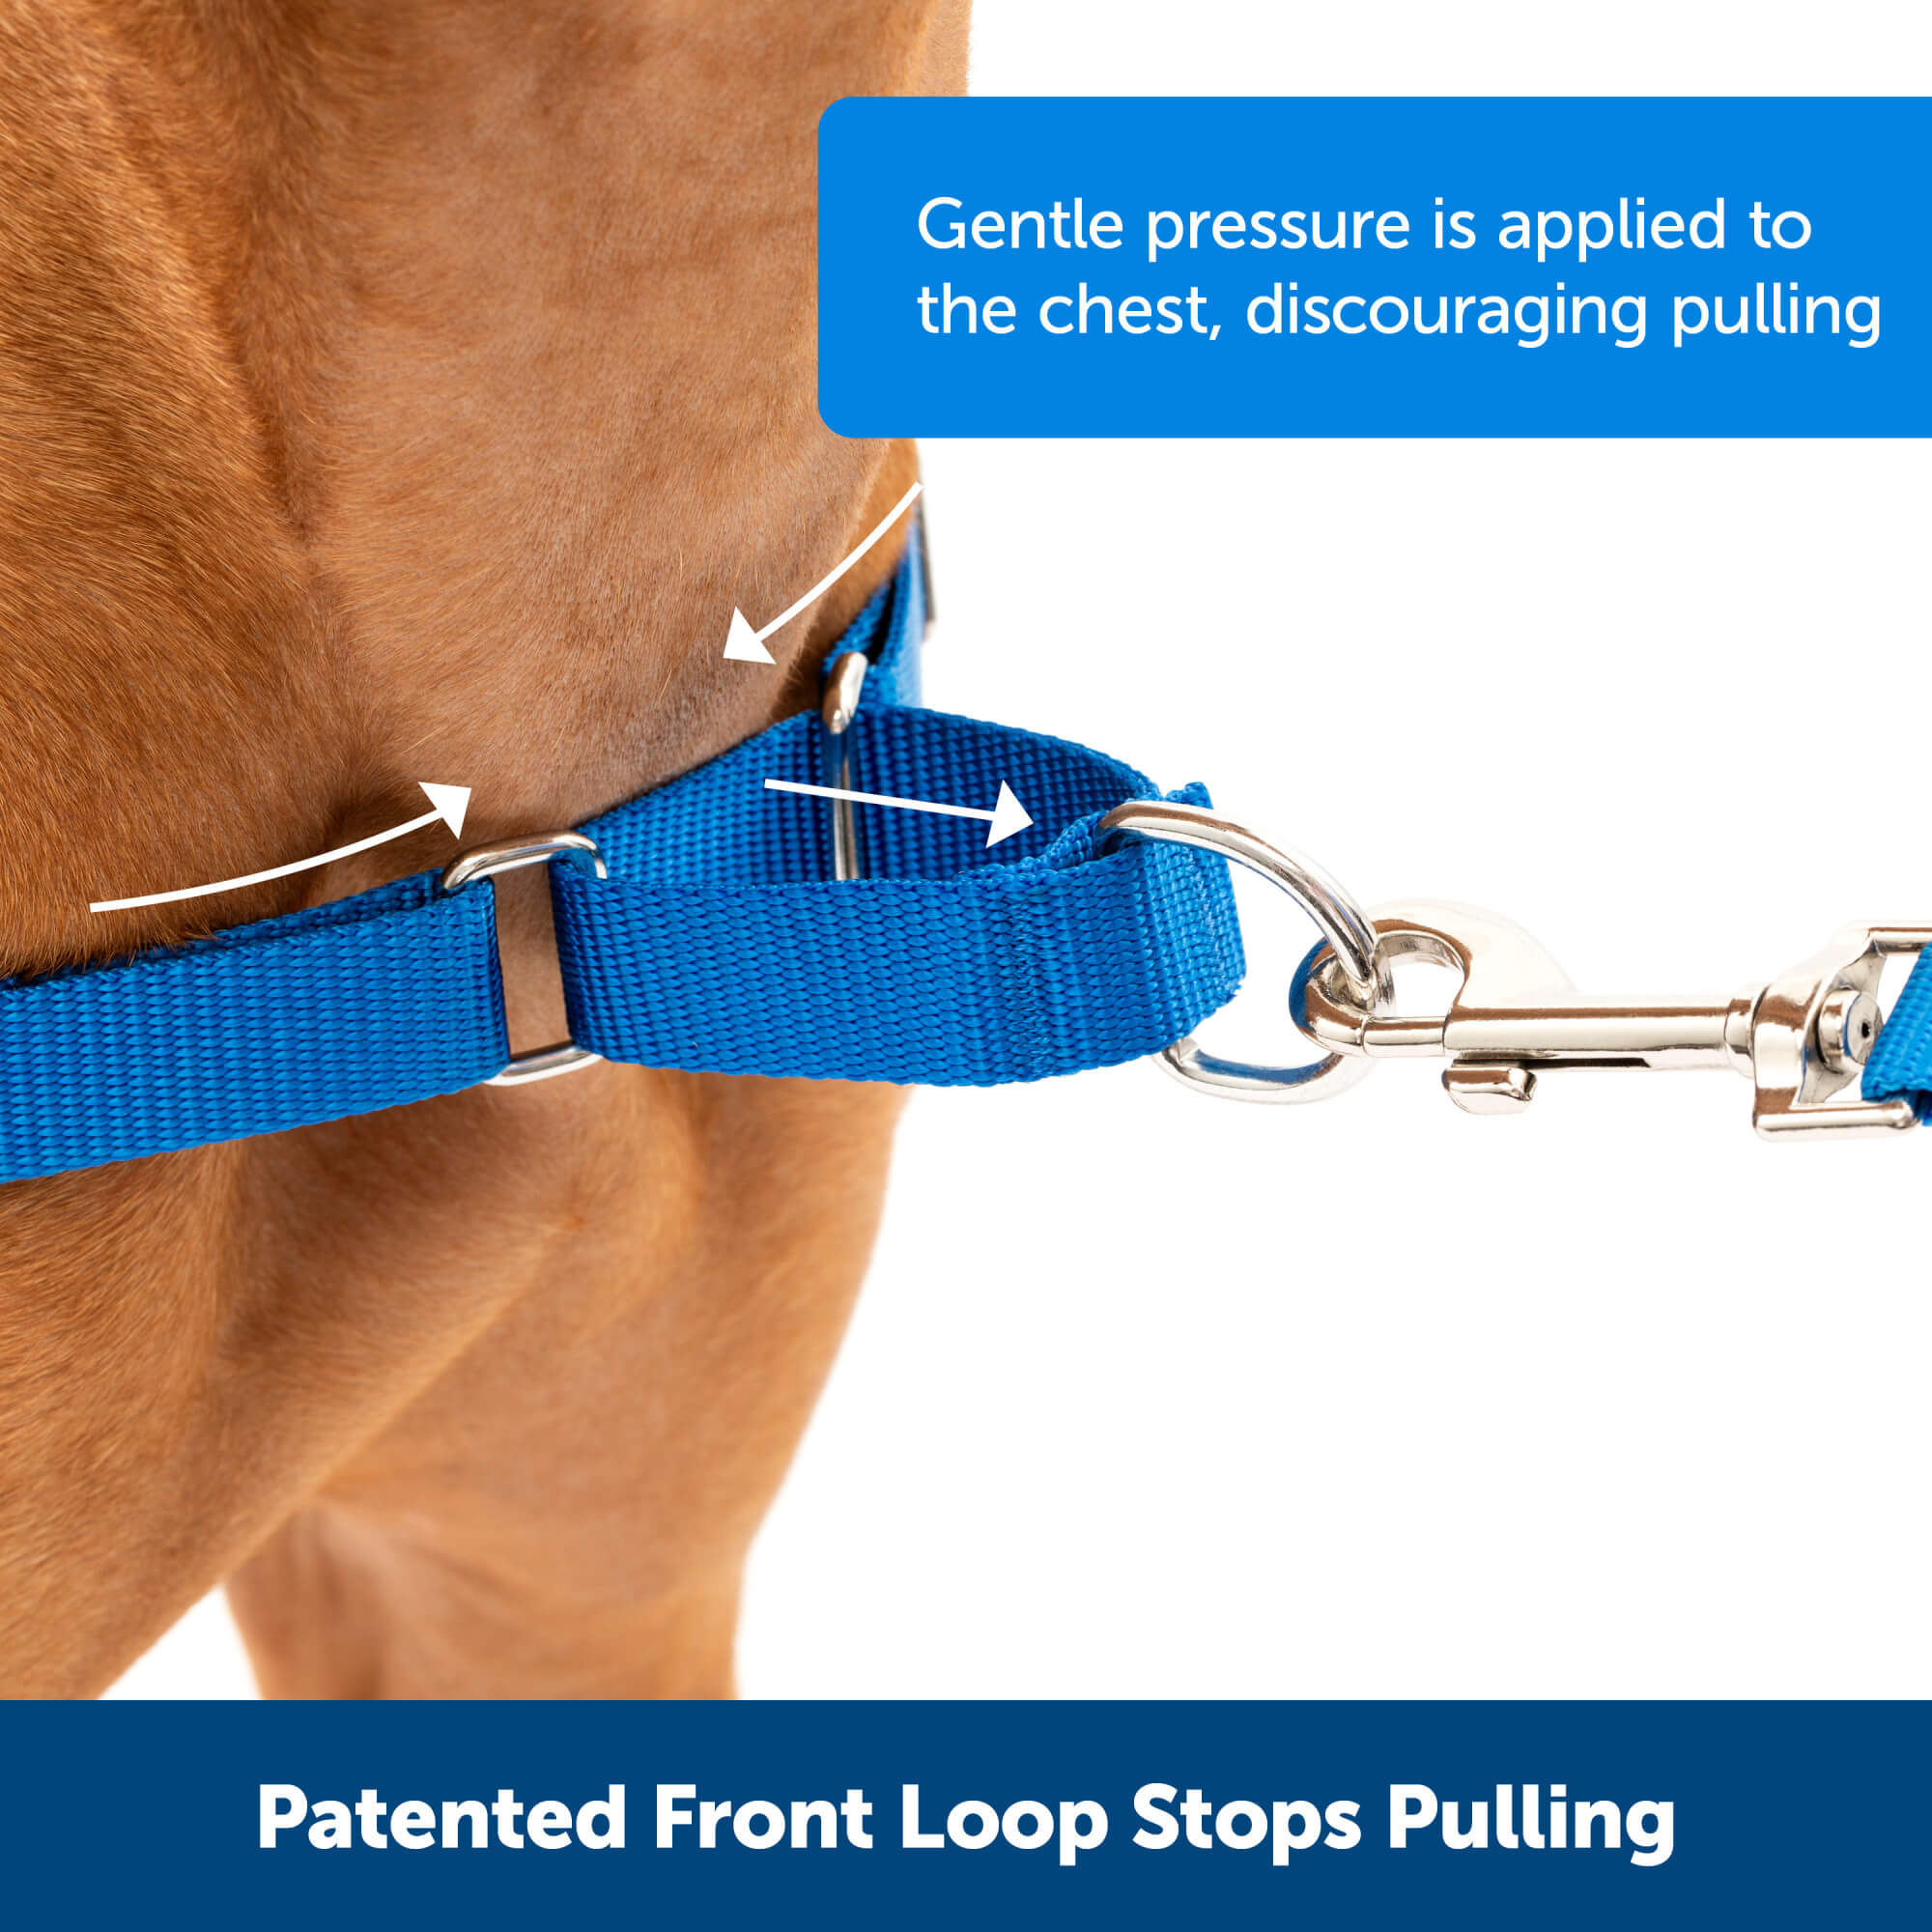 PetSafe Patented front loop stops pulling